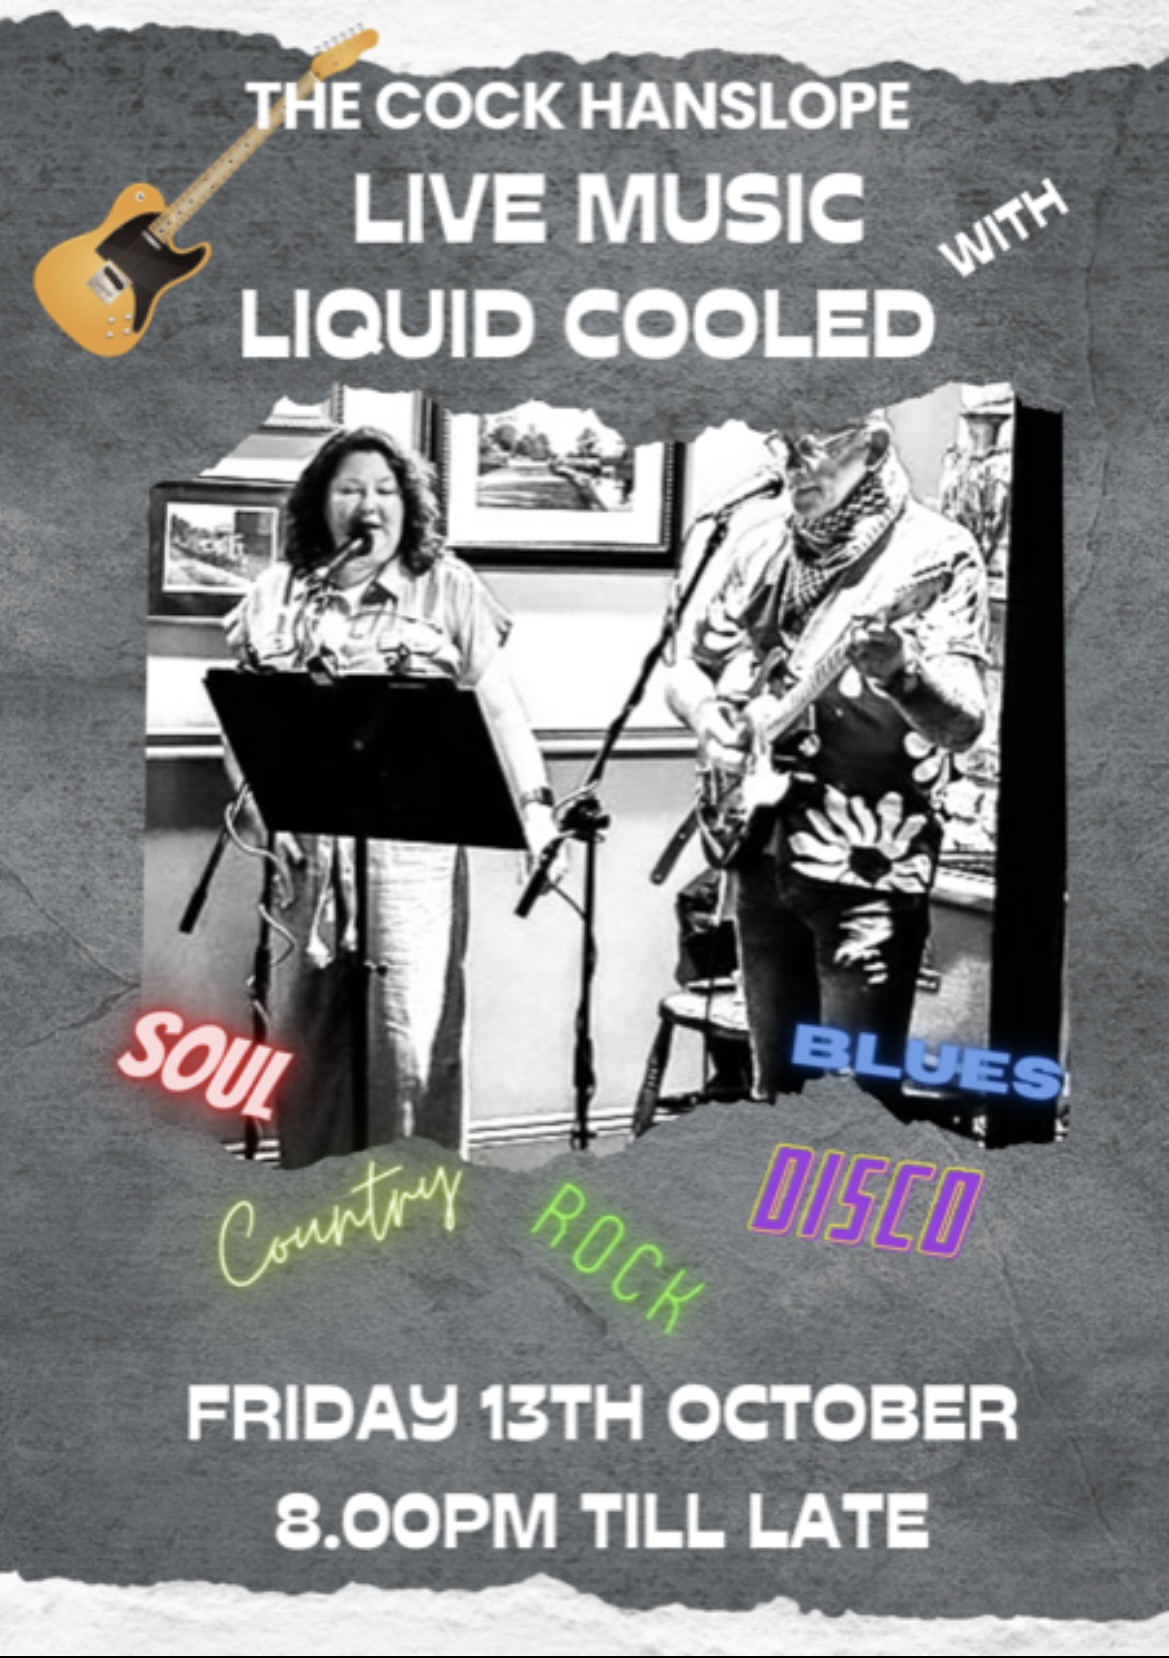 Live Music at The Cock Inn, Hanslope with Liquid Cooled